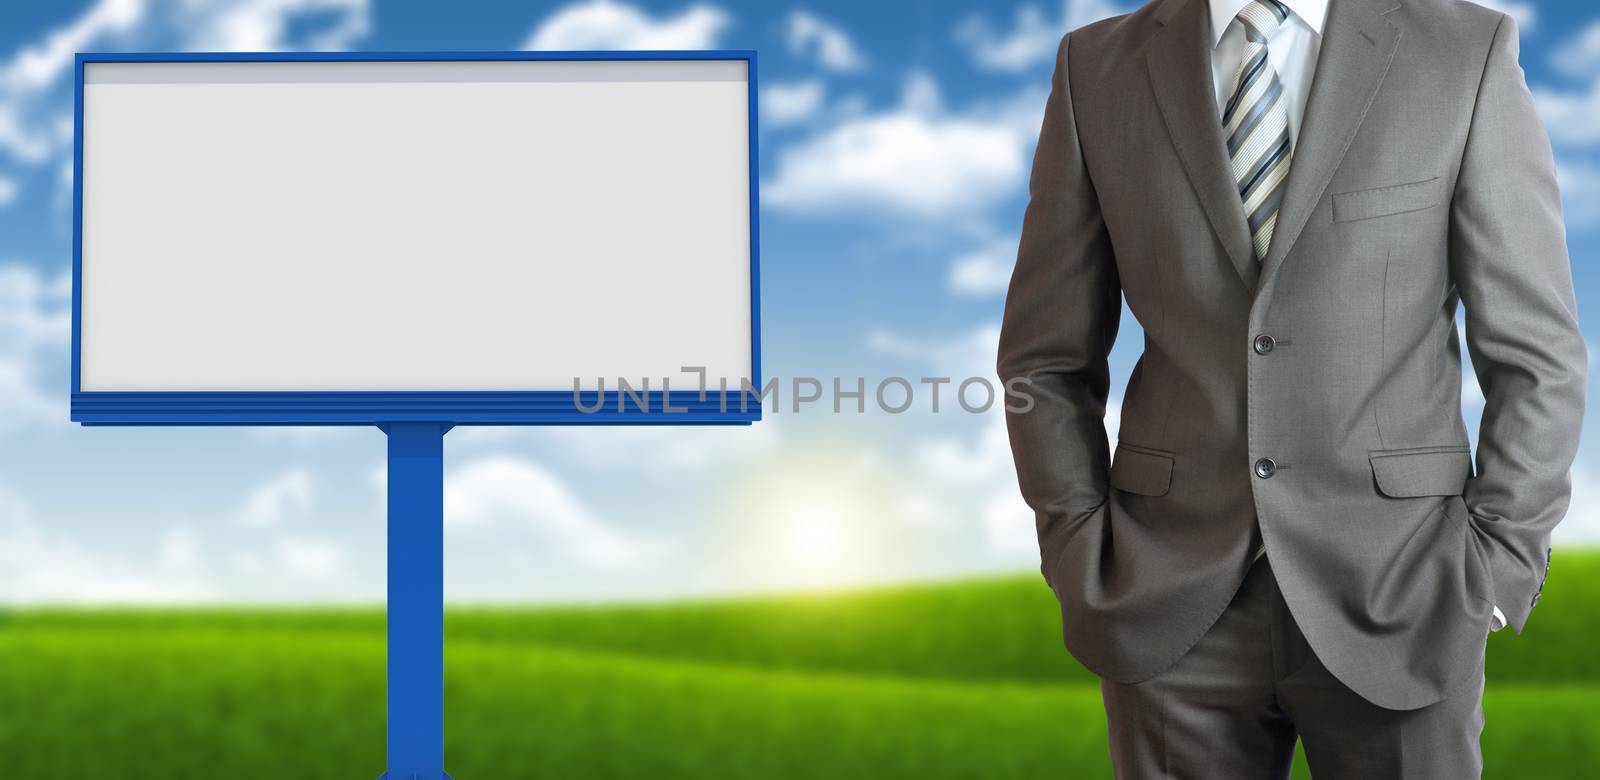 Businessman standing with hands in pockets. Blank billboard, blue sky and green grass as backdrop